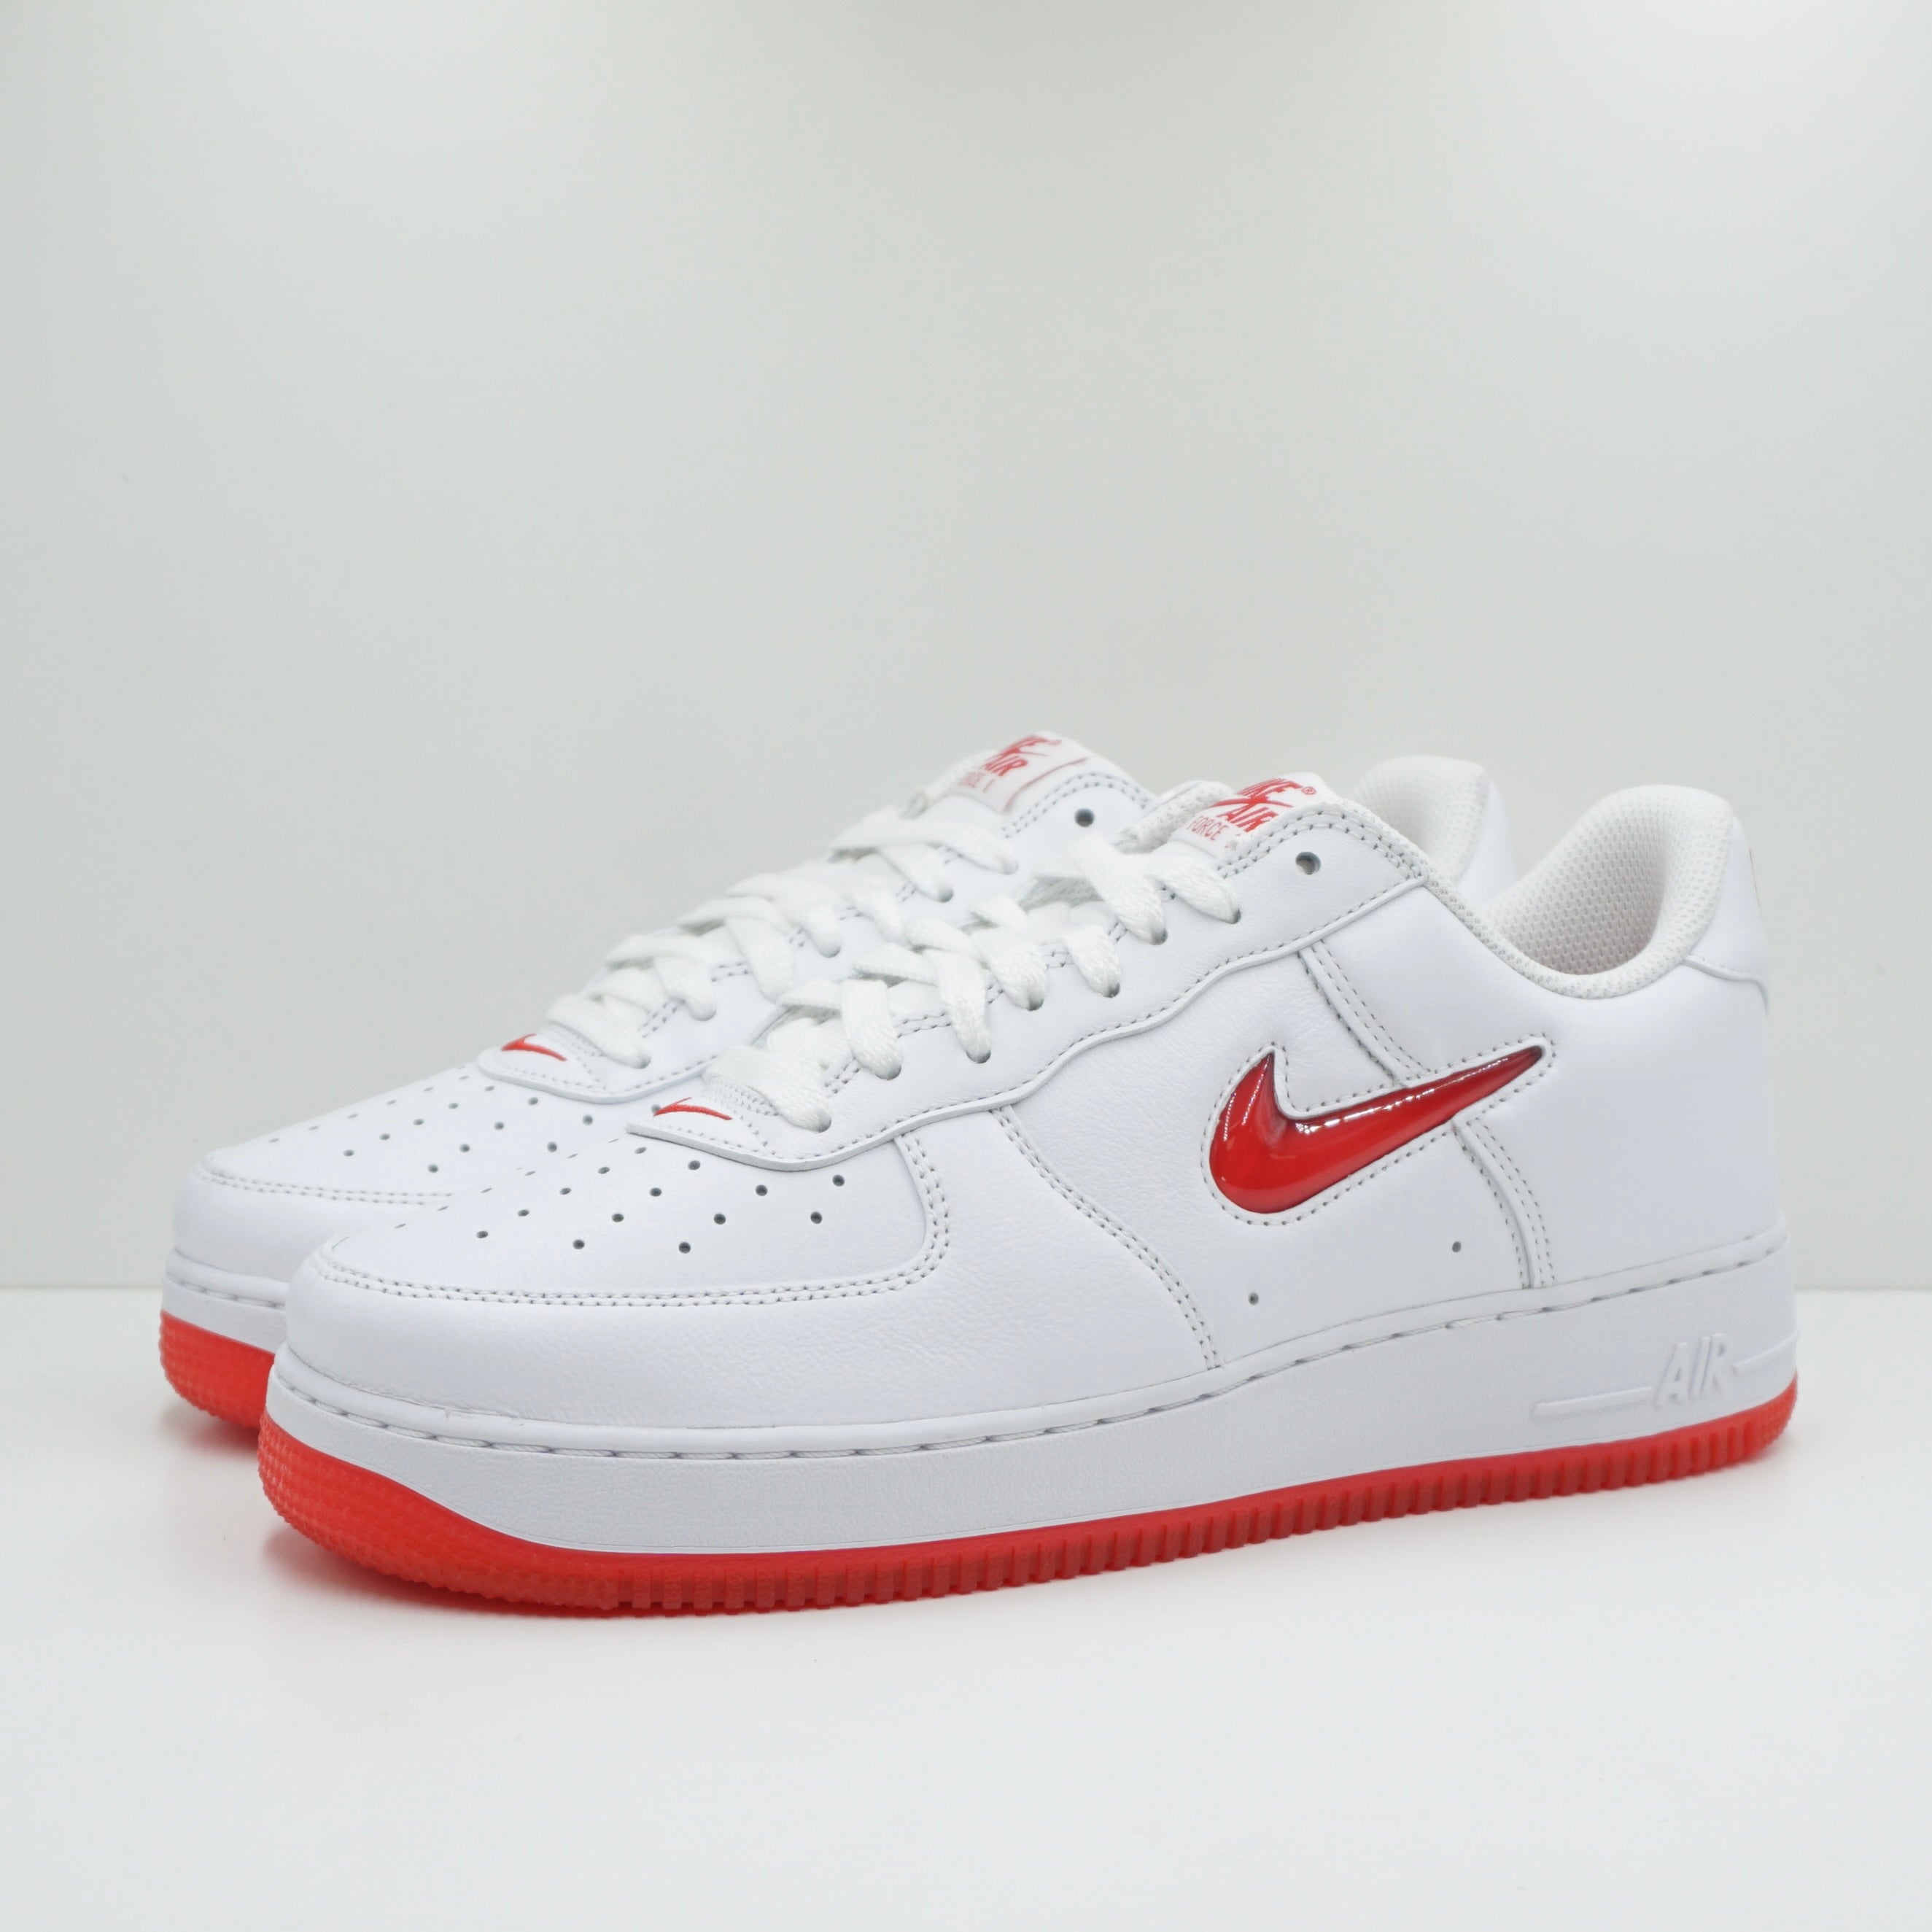 Nike Air Force 1 Low '07 Retro Color Of The Month Jewel Swoosh University Red